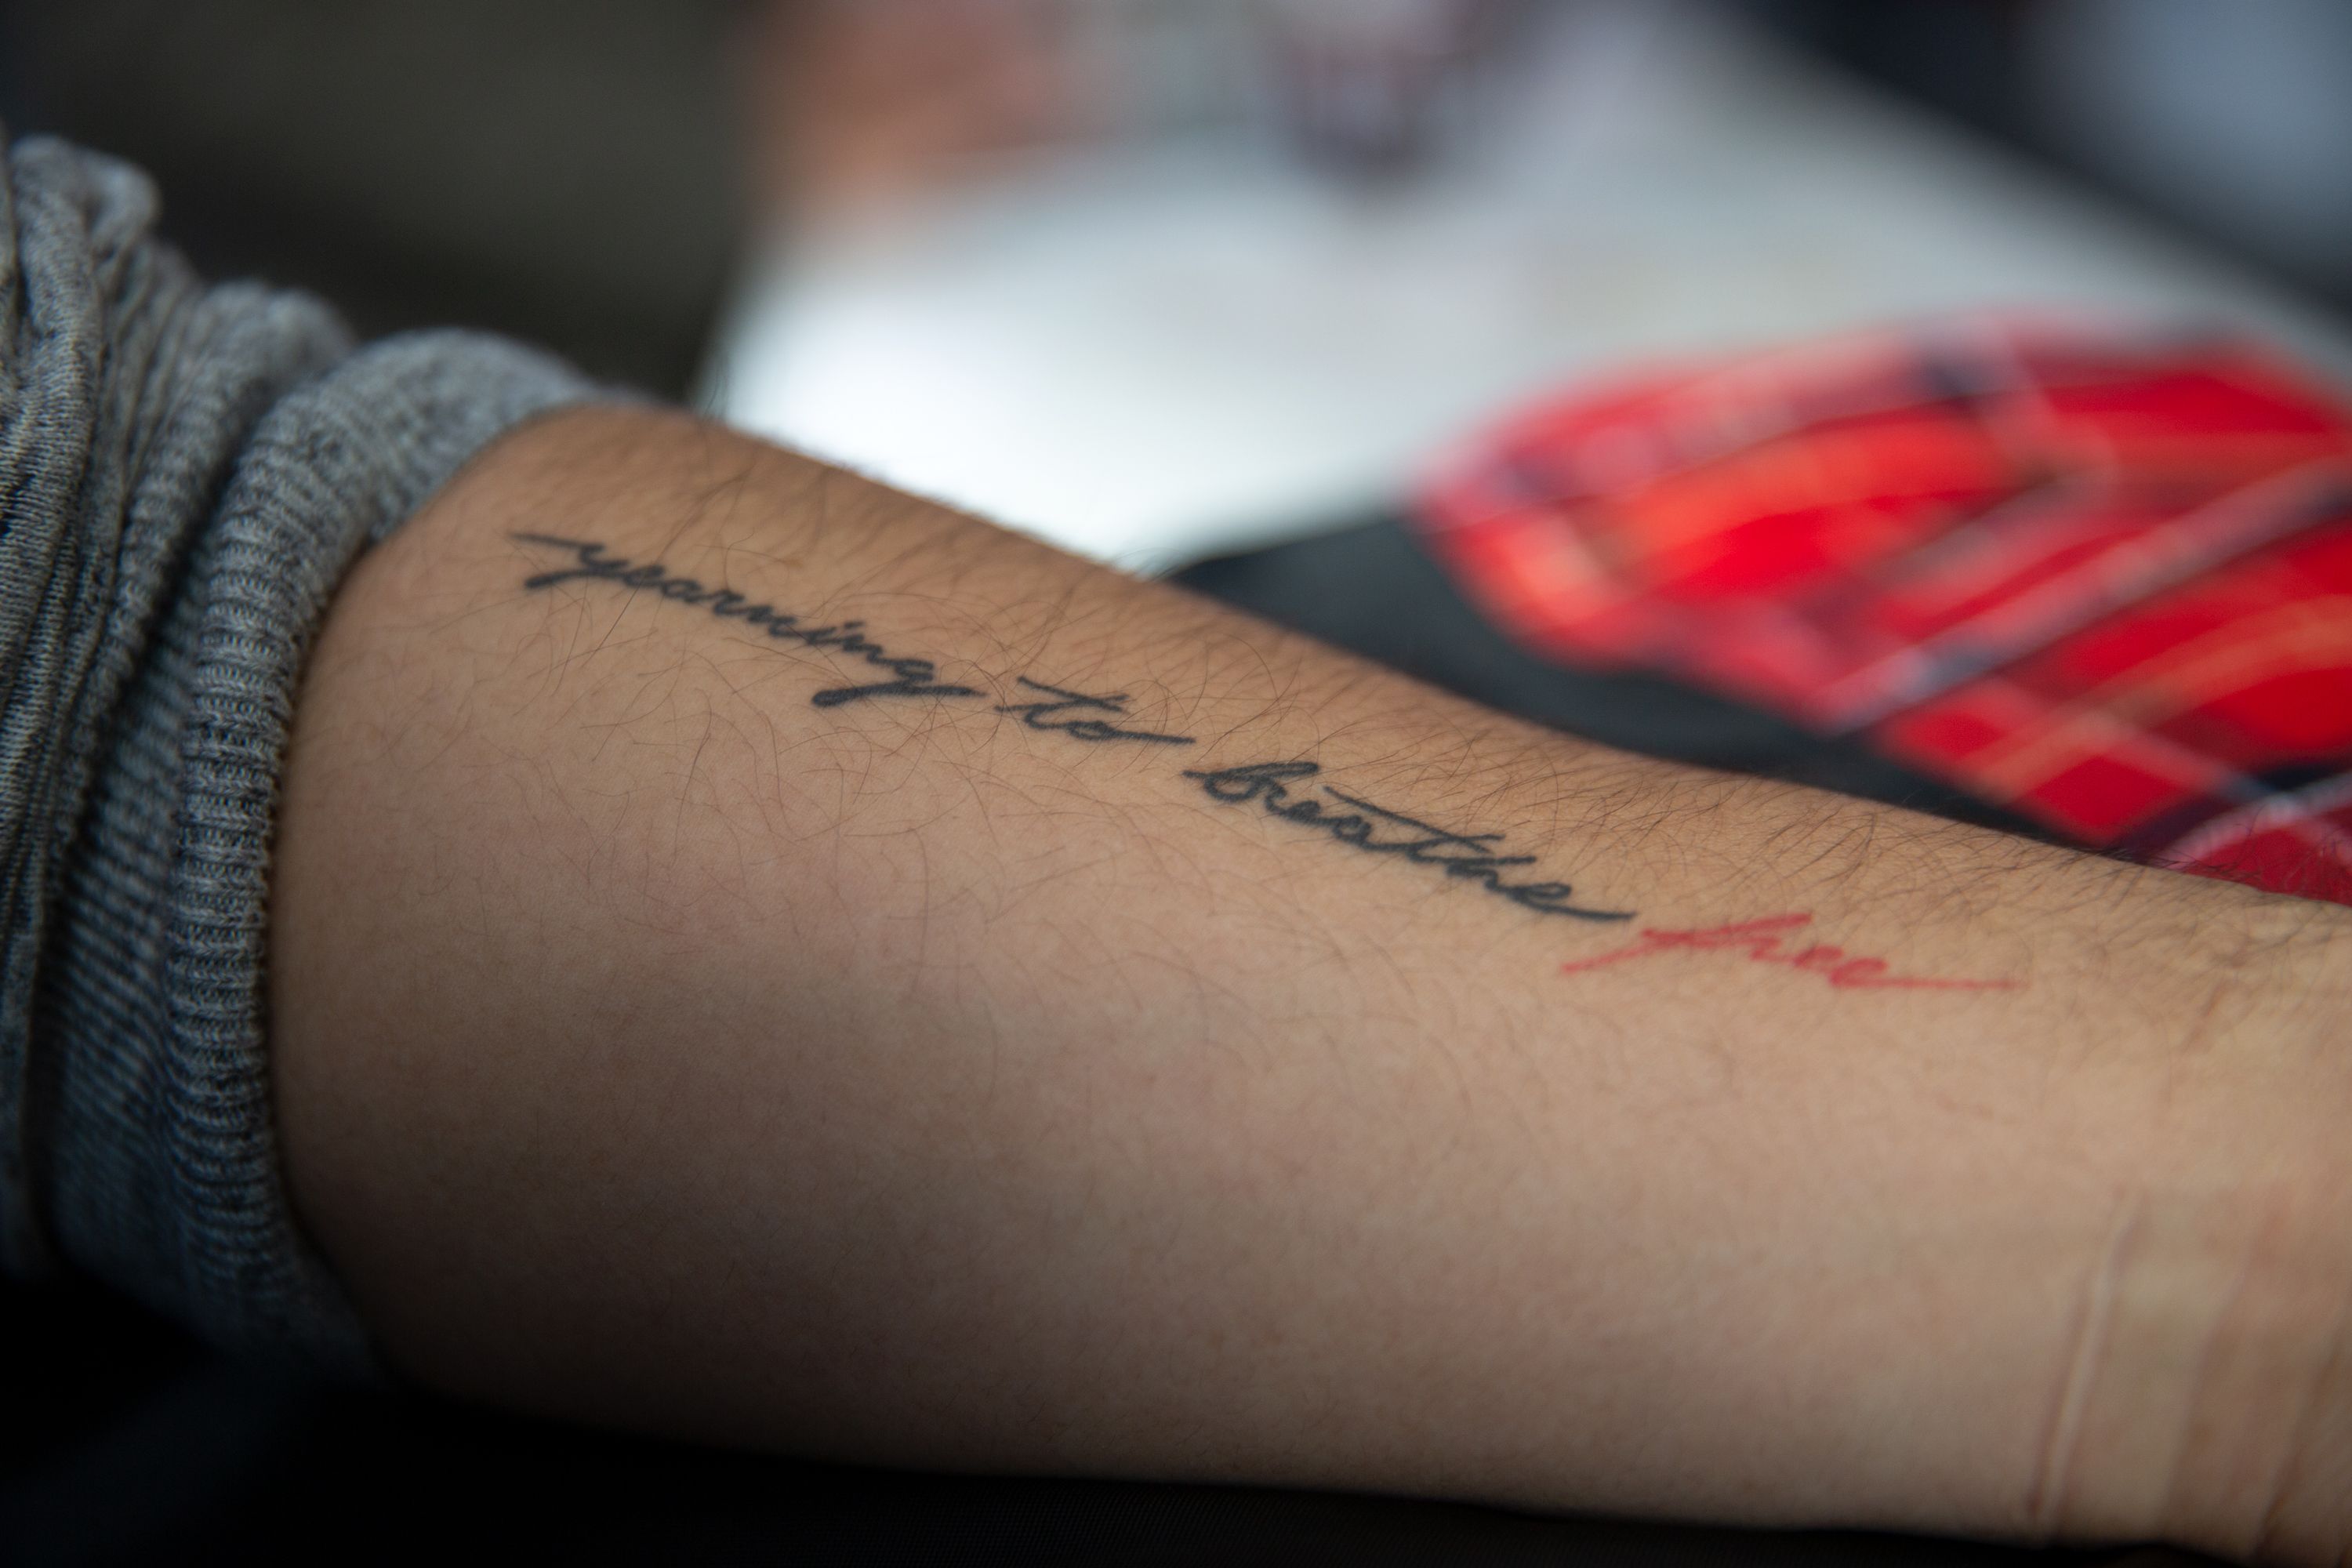 DACA recipient Raul Contreras has words tattooed on him from the famed Emma Lazarus poem on the Statue of Liberty, March 5, 2020.